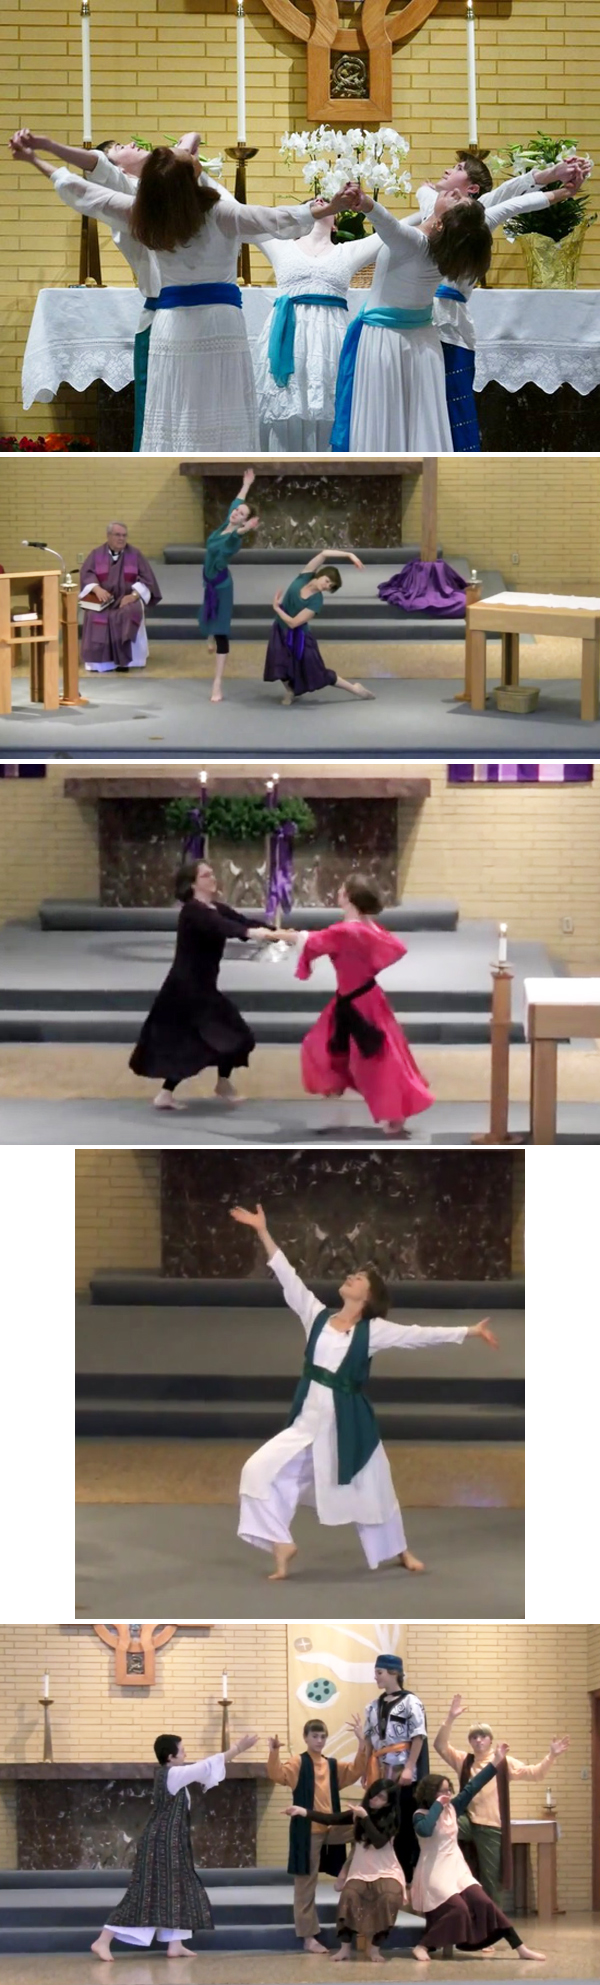 collage of Women doing liturgical dance on the altar in the St. Patricks Church